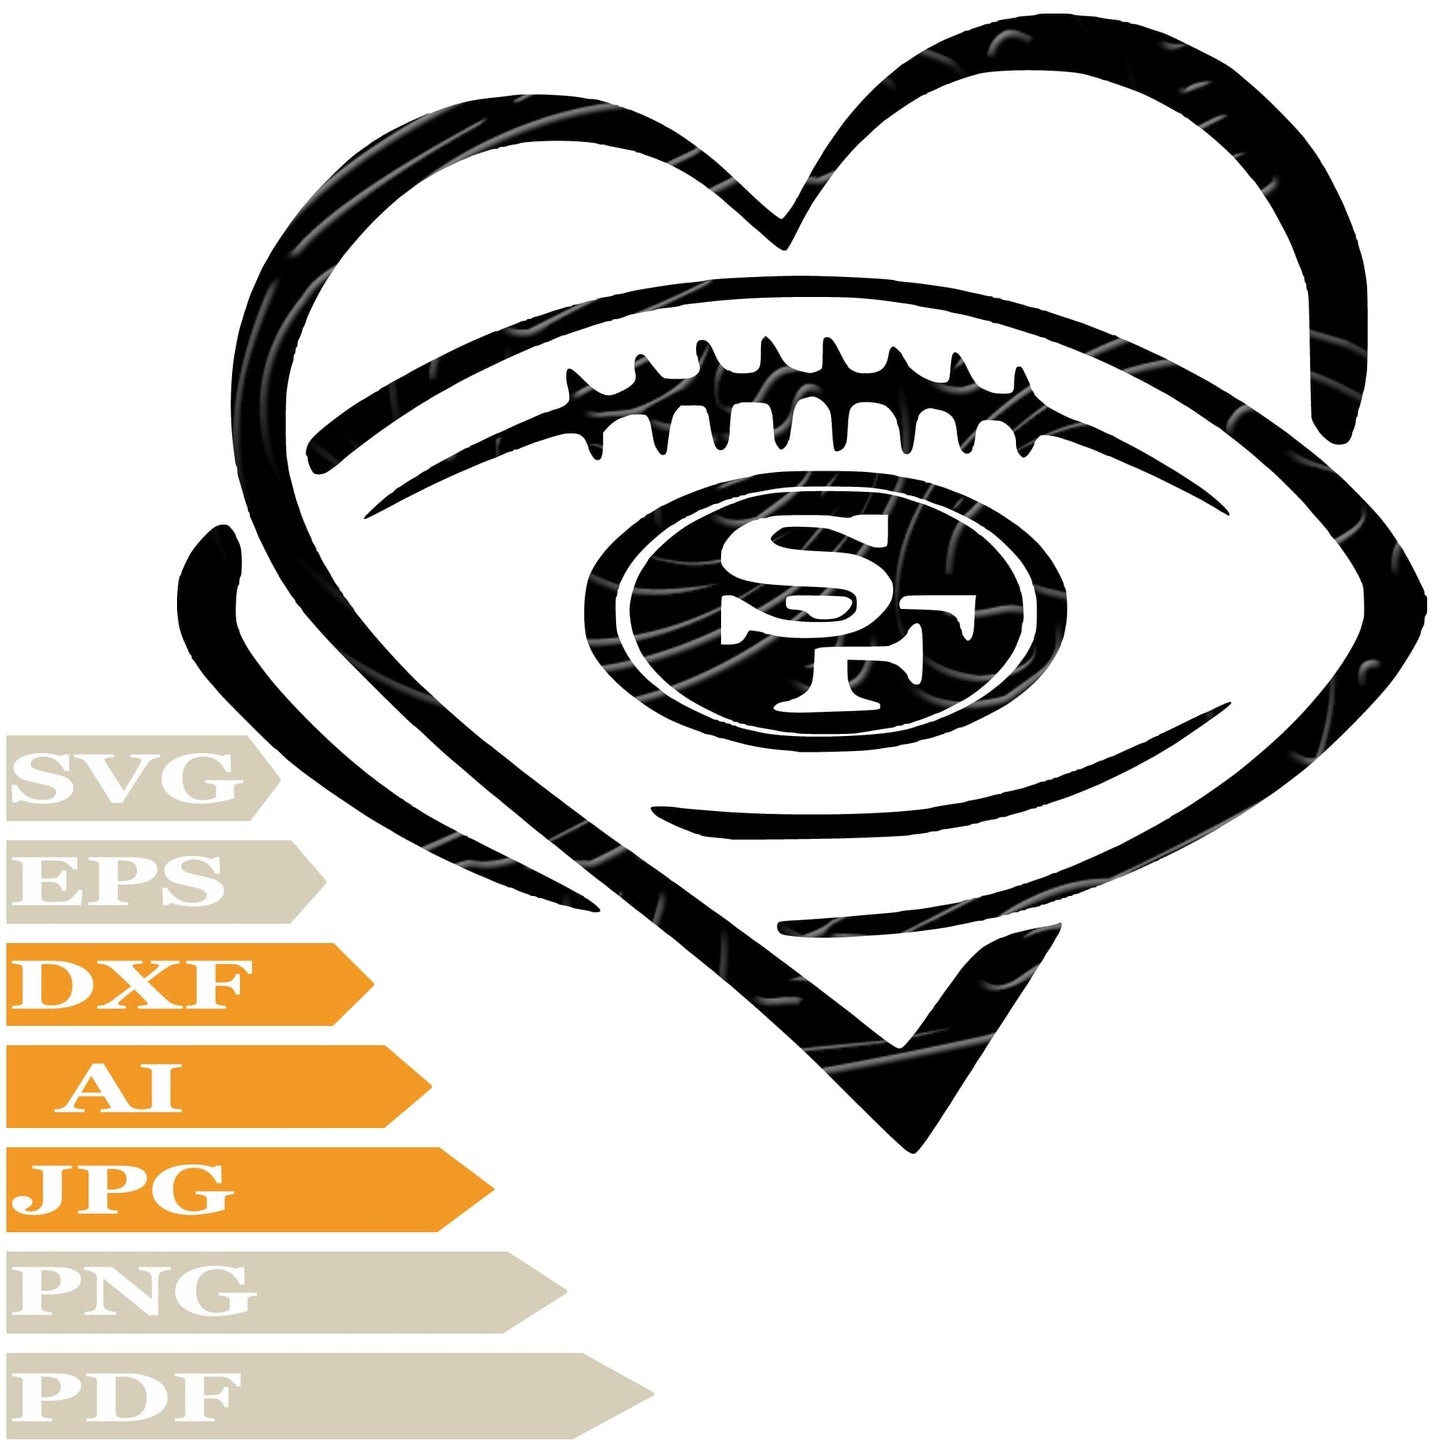 San Francisco Football, San Francisco 49ers Logo Svg File, Image Cut, Png, For Tattoo, Silhouette, Digital Vector Download, Cut File, Clipart, For Cricut